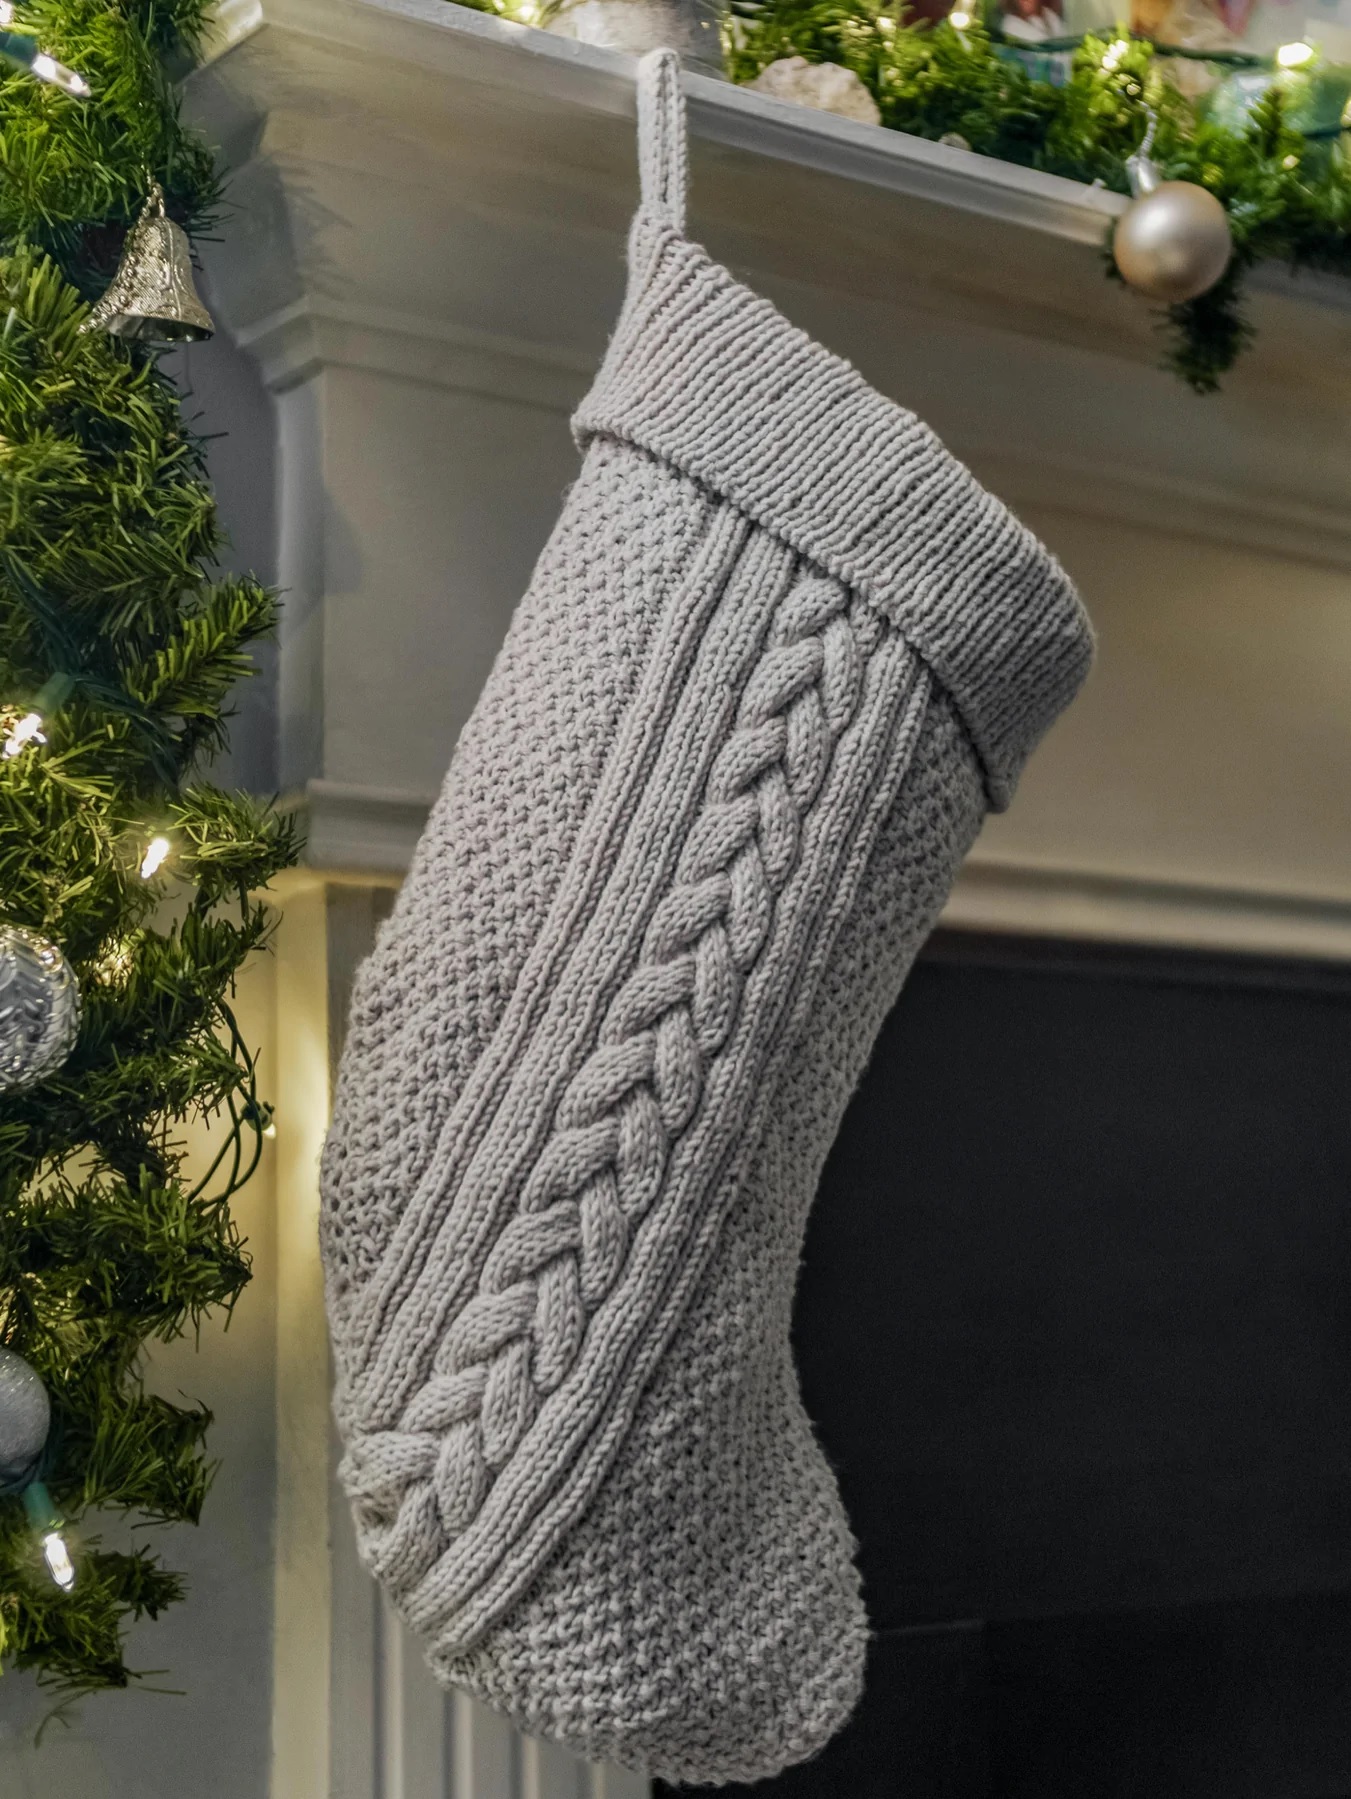 A cable knit Christmas stocking, inspired by the line art trails left when a sled